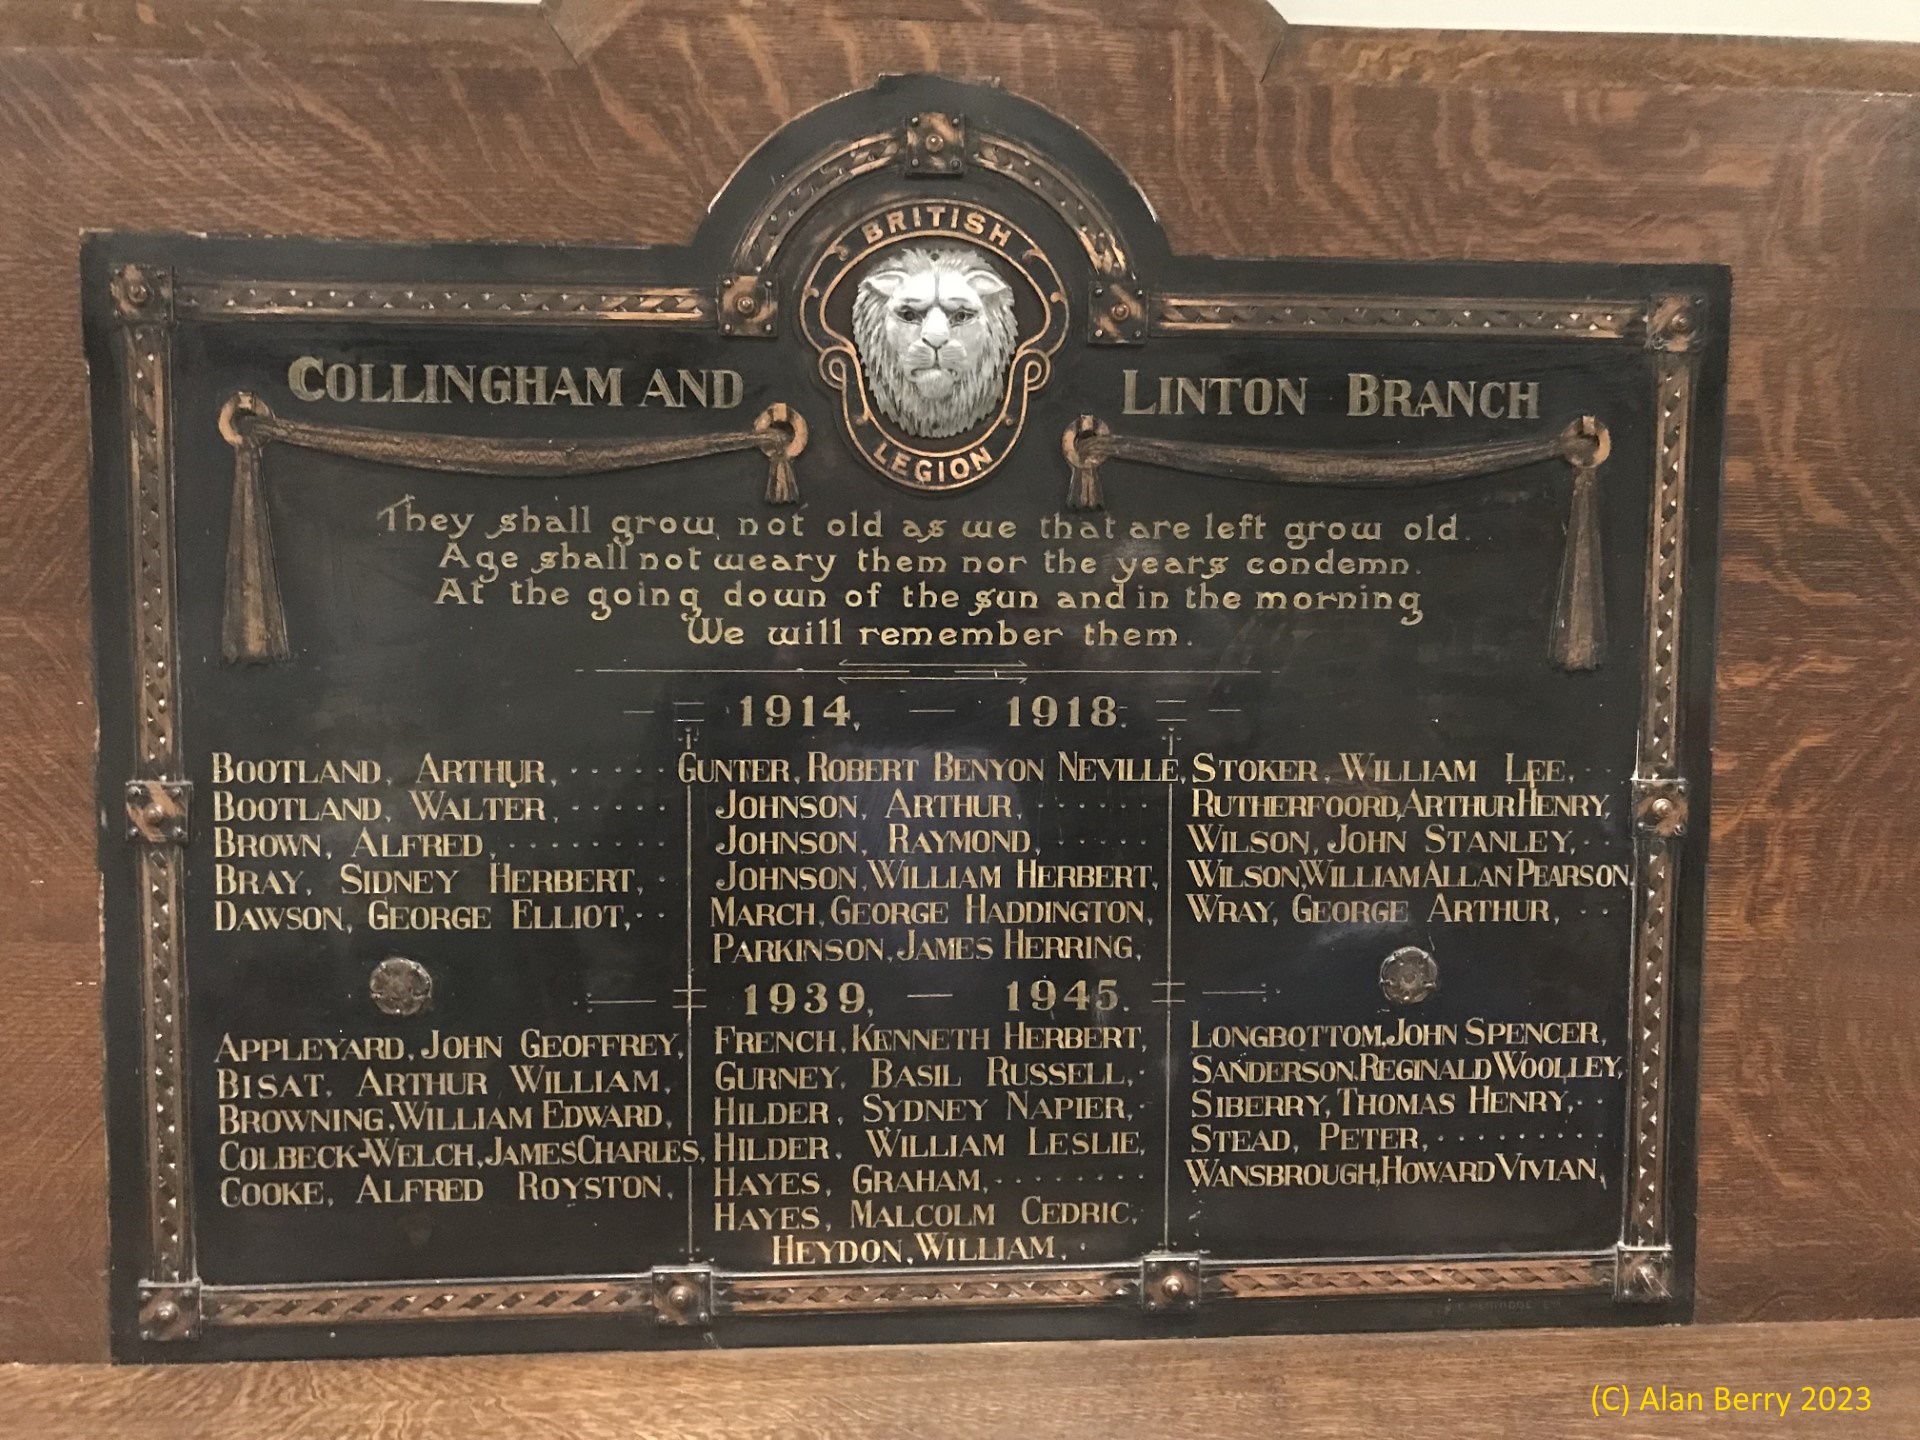 The Memorial tablet in the Royal British Legion Room